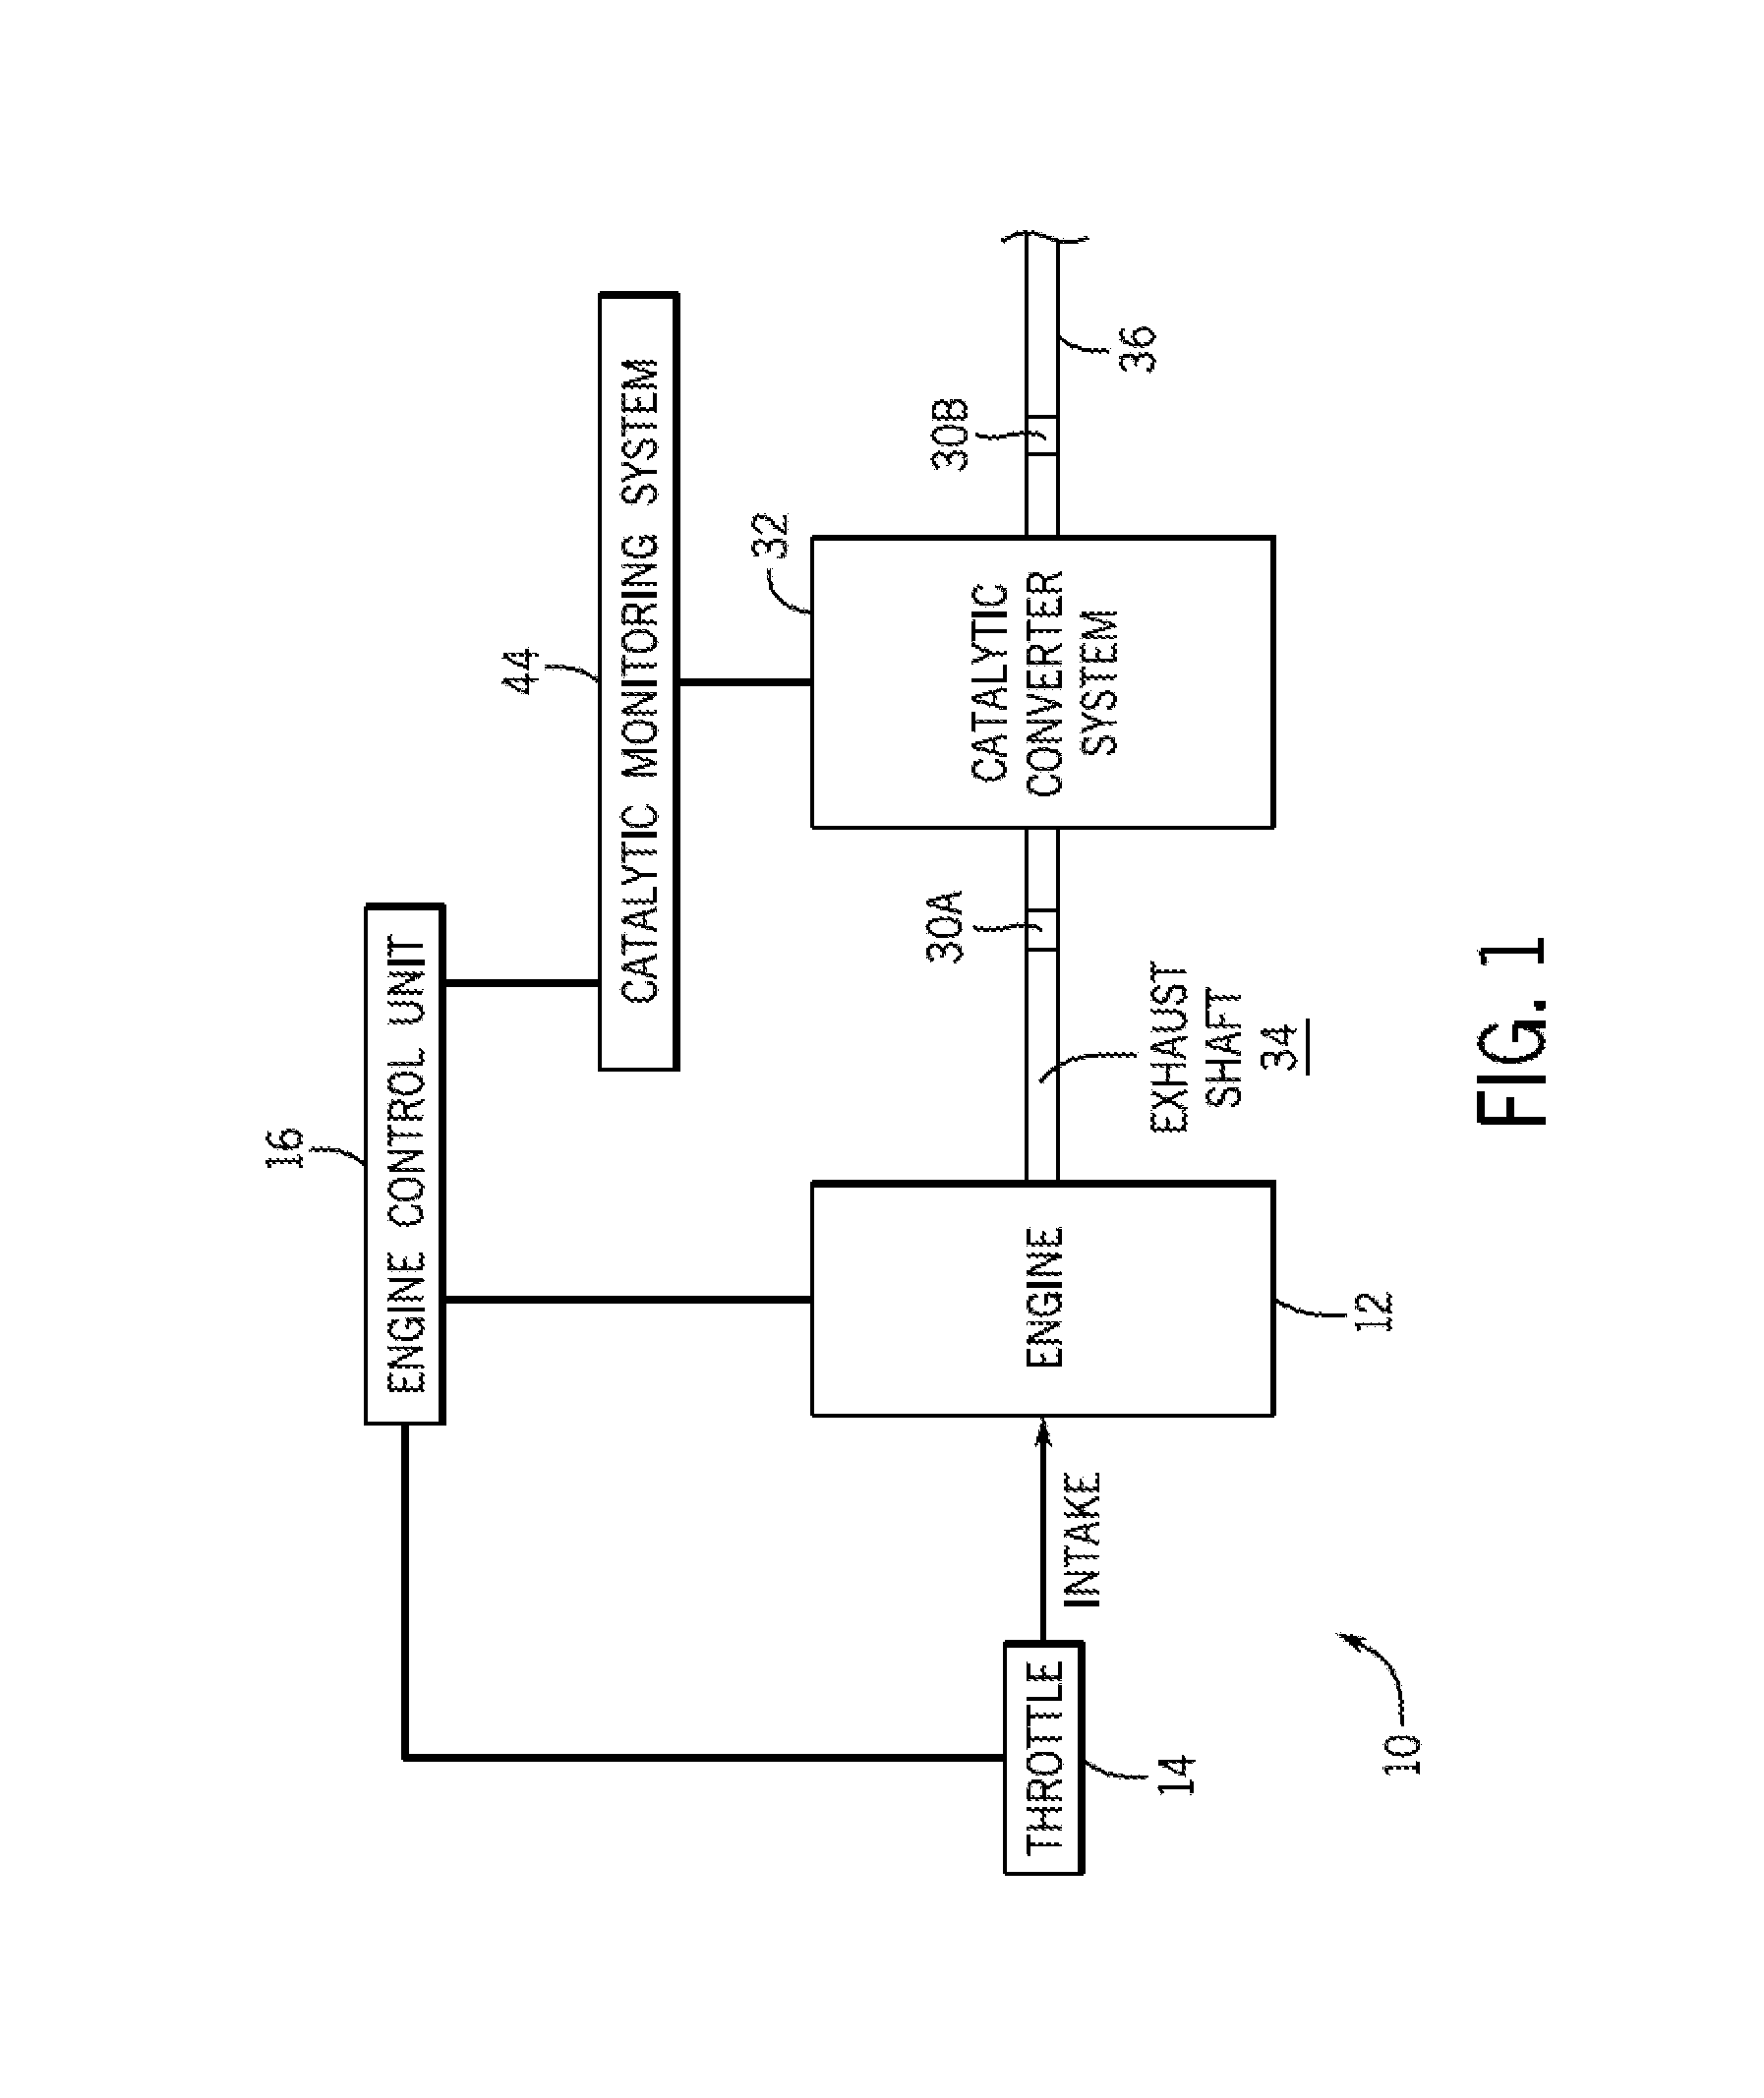 Systems and Methods for Controlling Air-to-Fuel Ratio Based on Catalytic Converter Performance